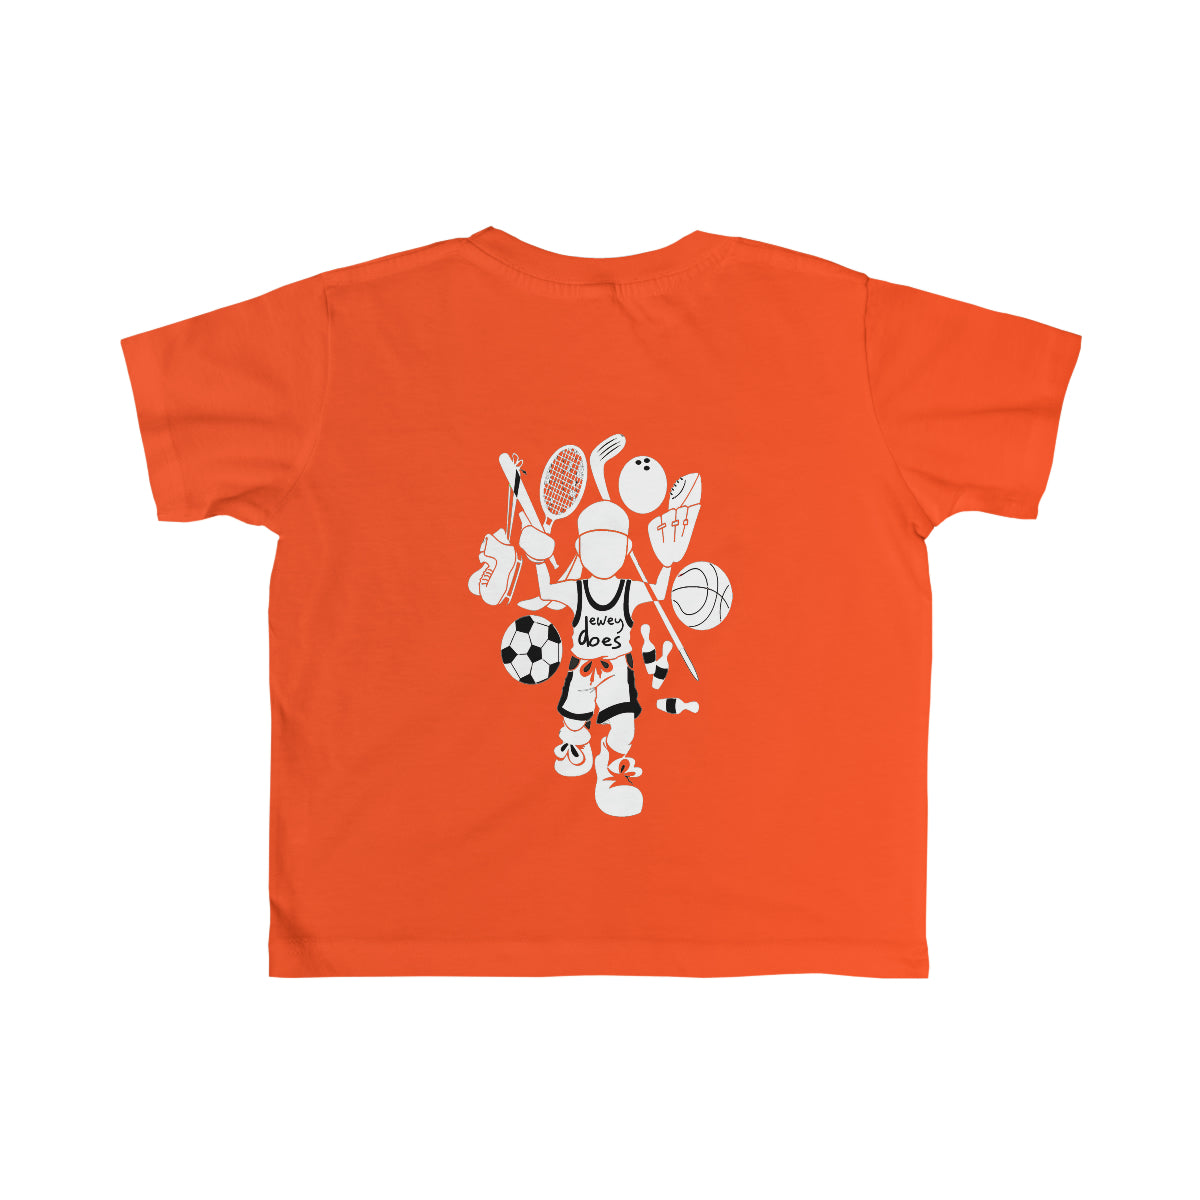 slowdown children playing - kid's fine jersey tee - choose your favorite color